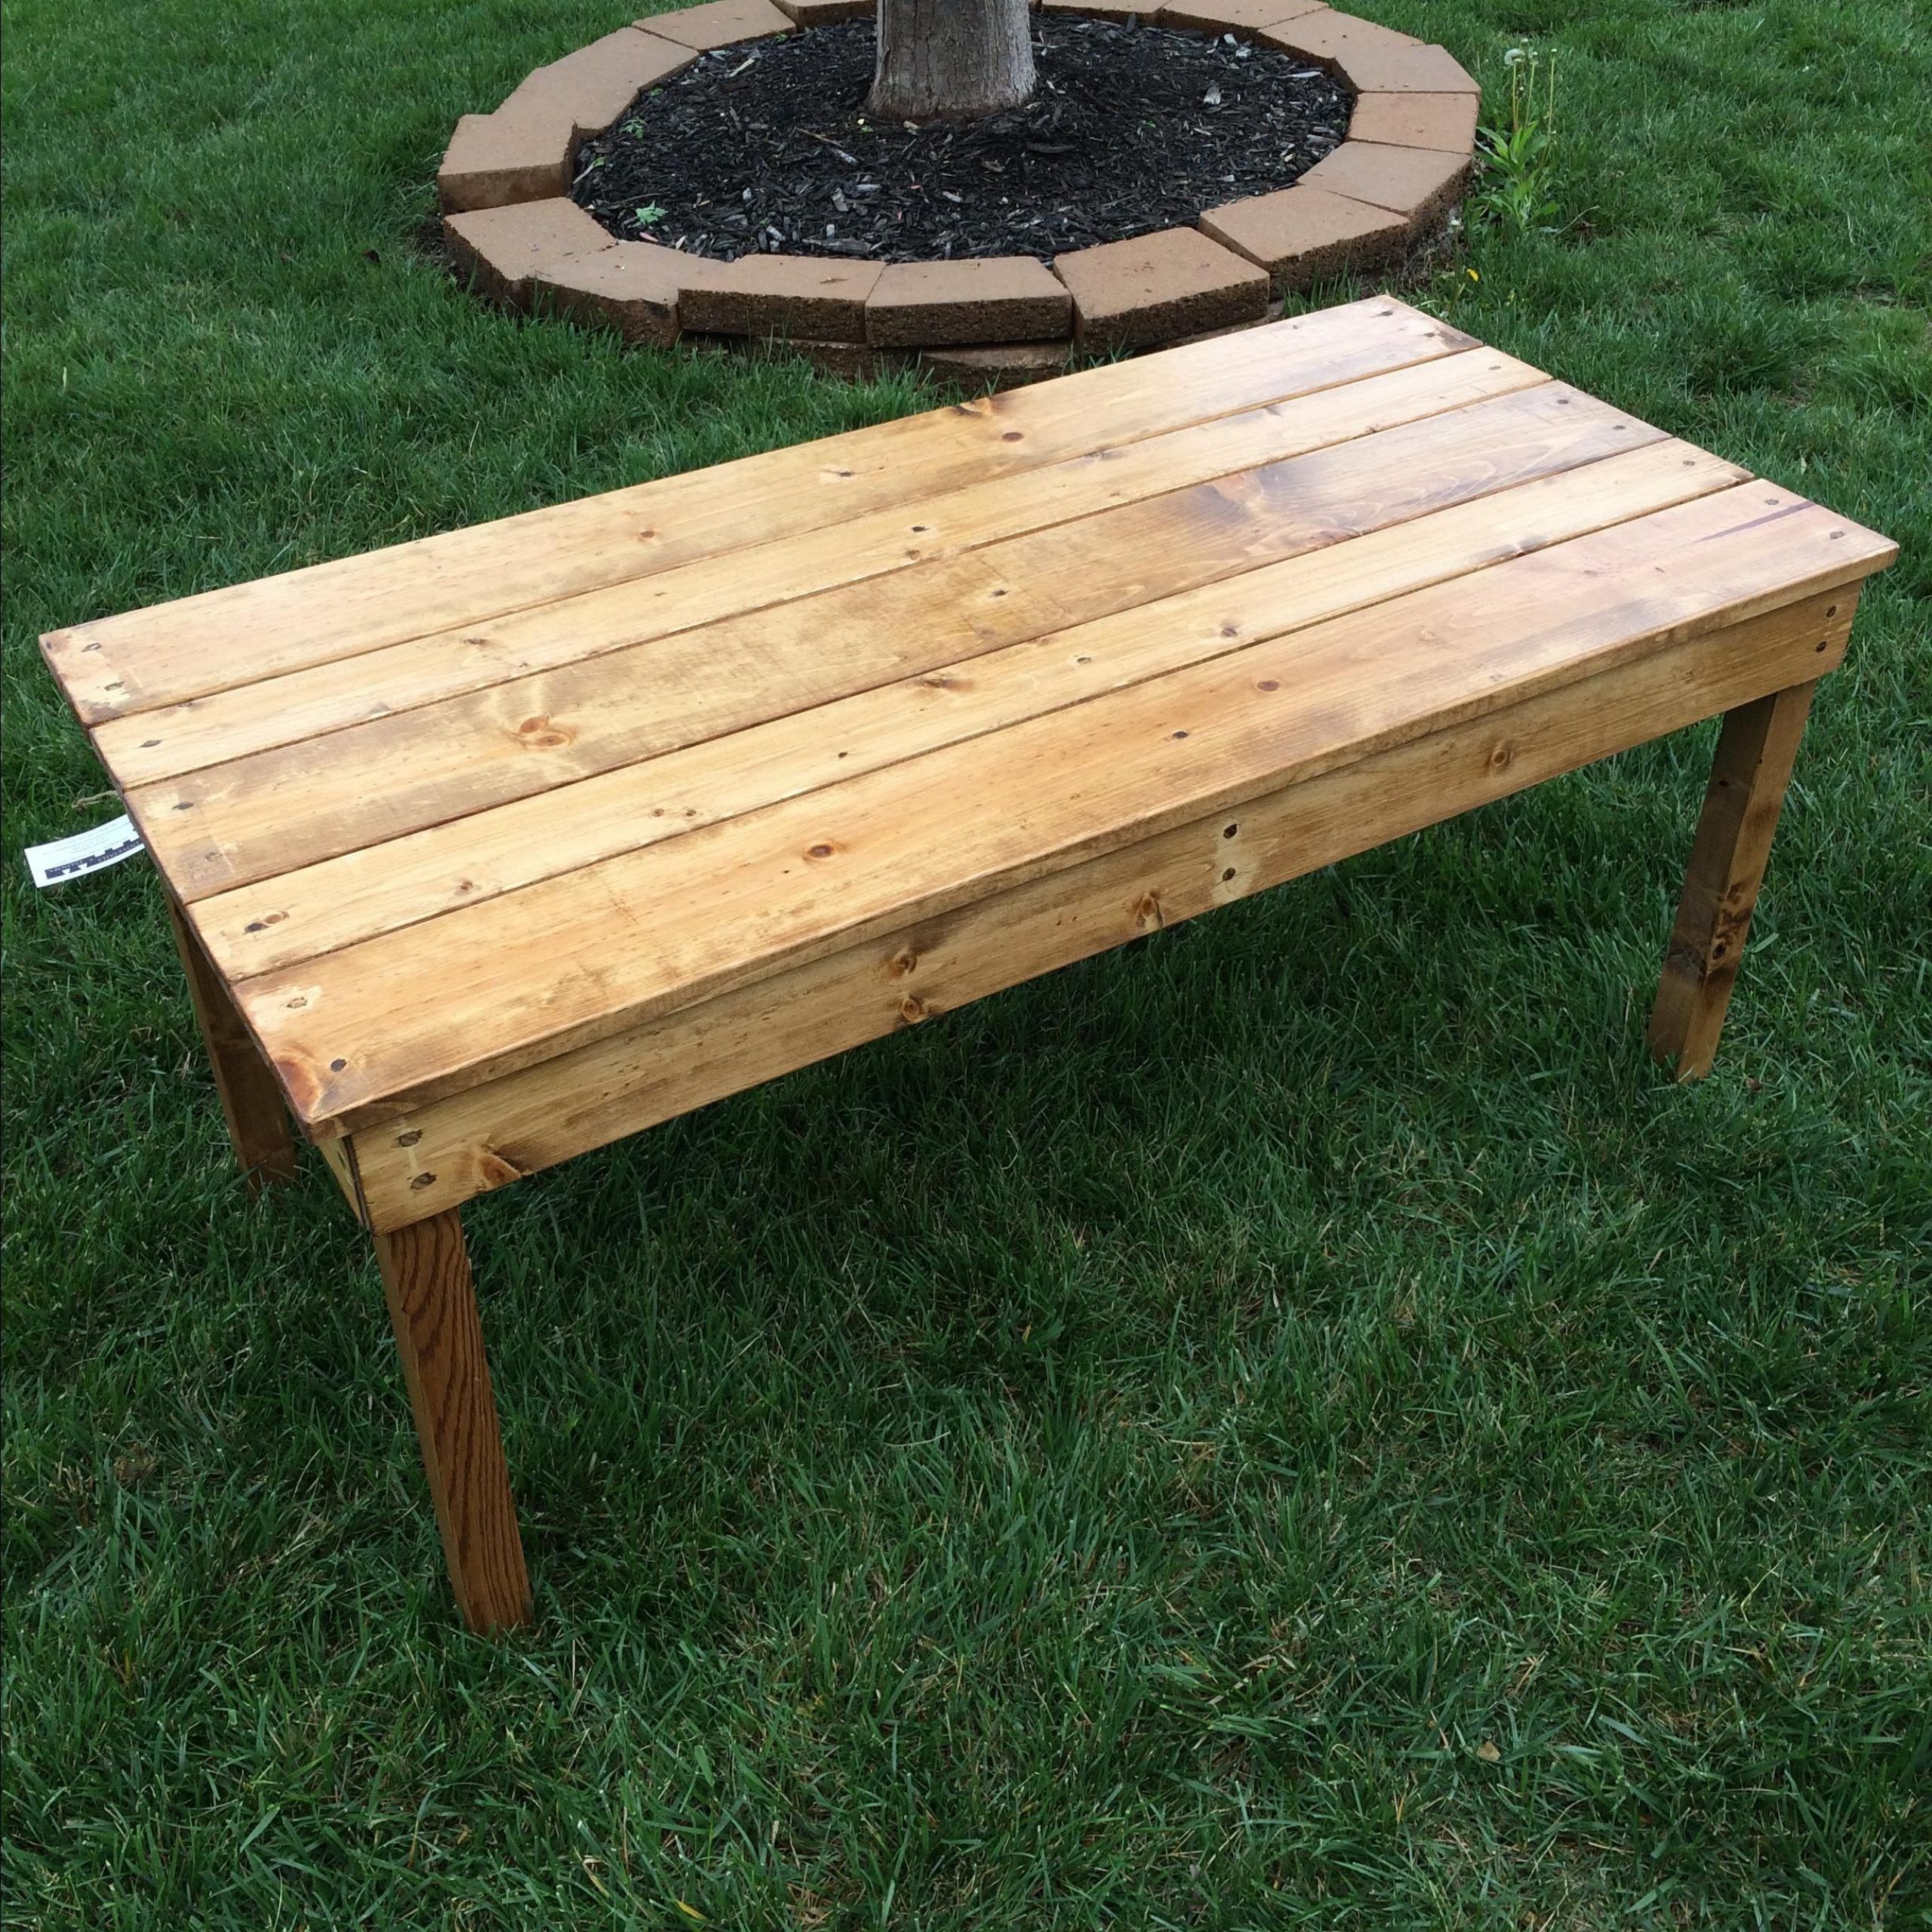 Buy A Handmade Rustic Coffee Table, Made To Order From Pertaining To Rustic Espresso Wood Coffee Tables (View 1 of 15)